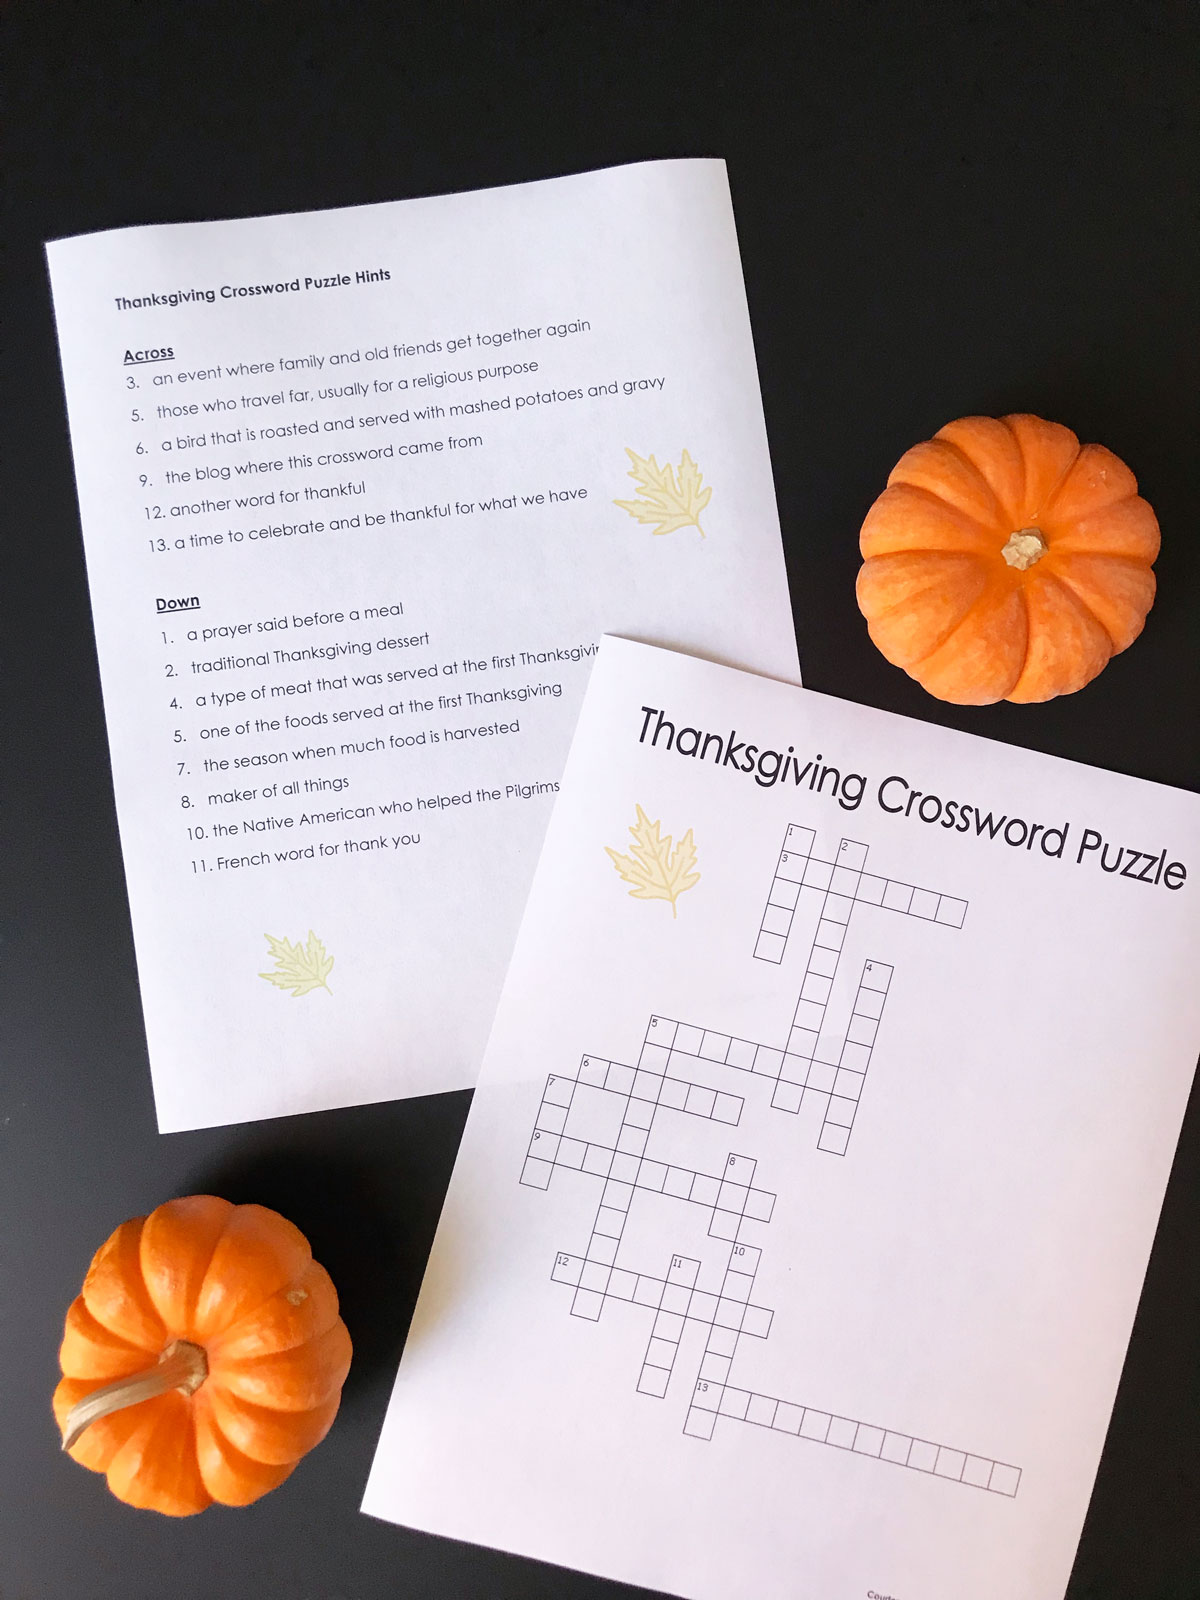 printed thanksgiving crossword puzzle and answer key on black table with mini pumpkins.